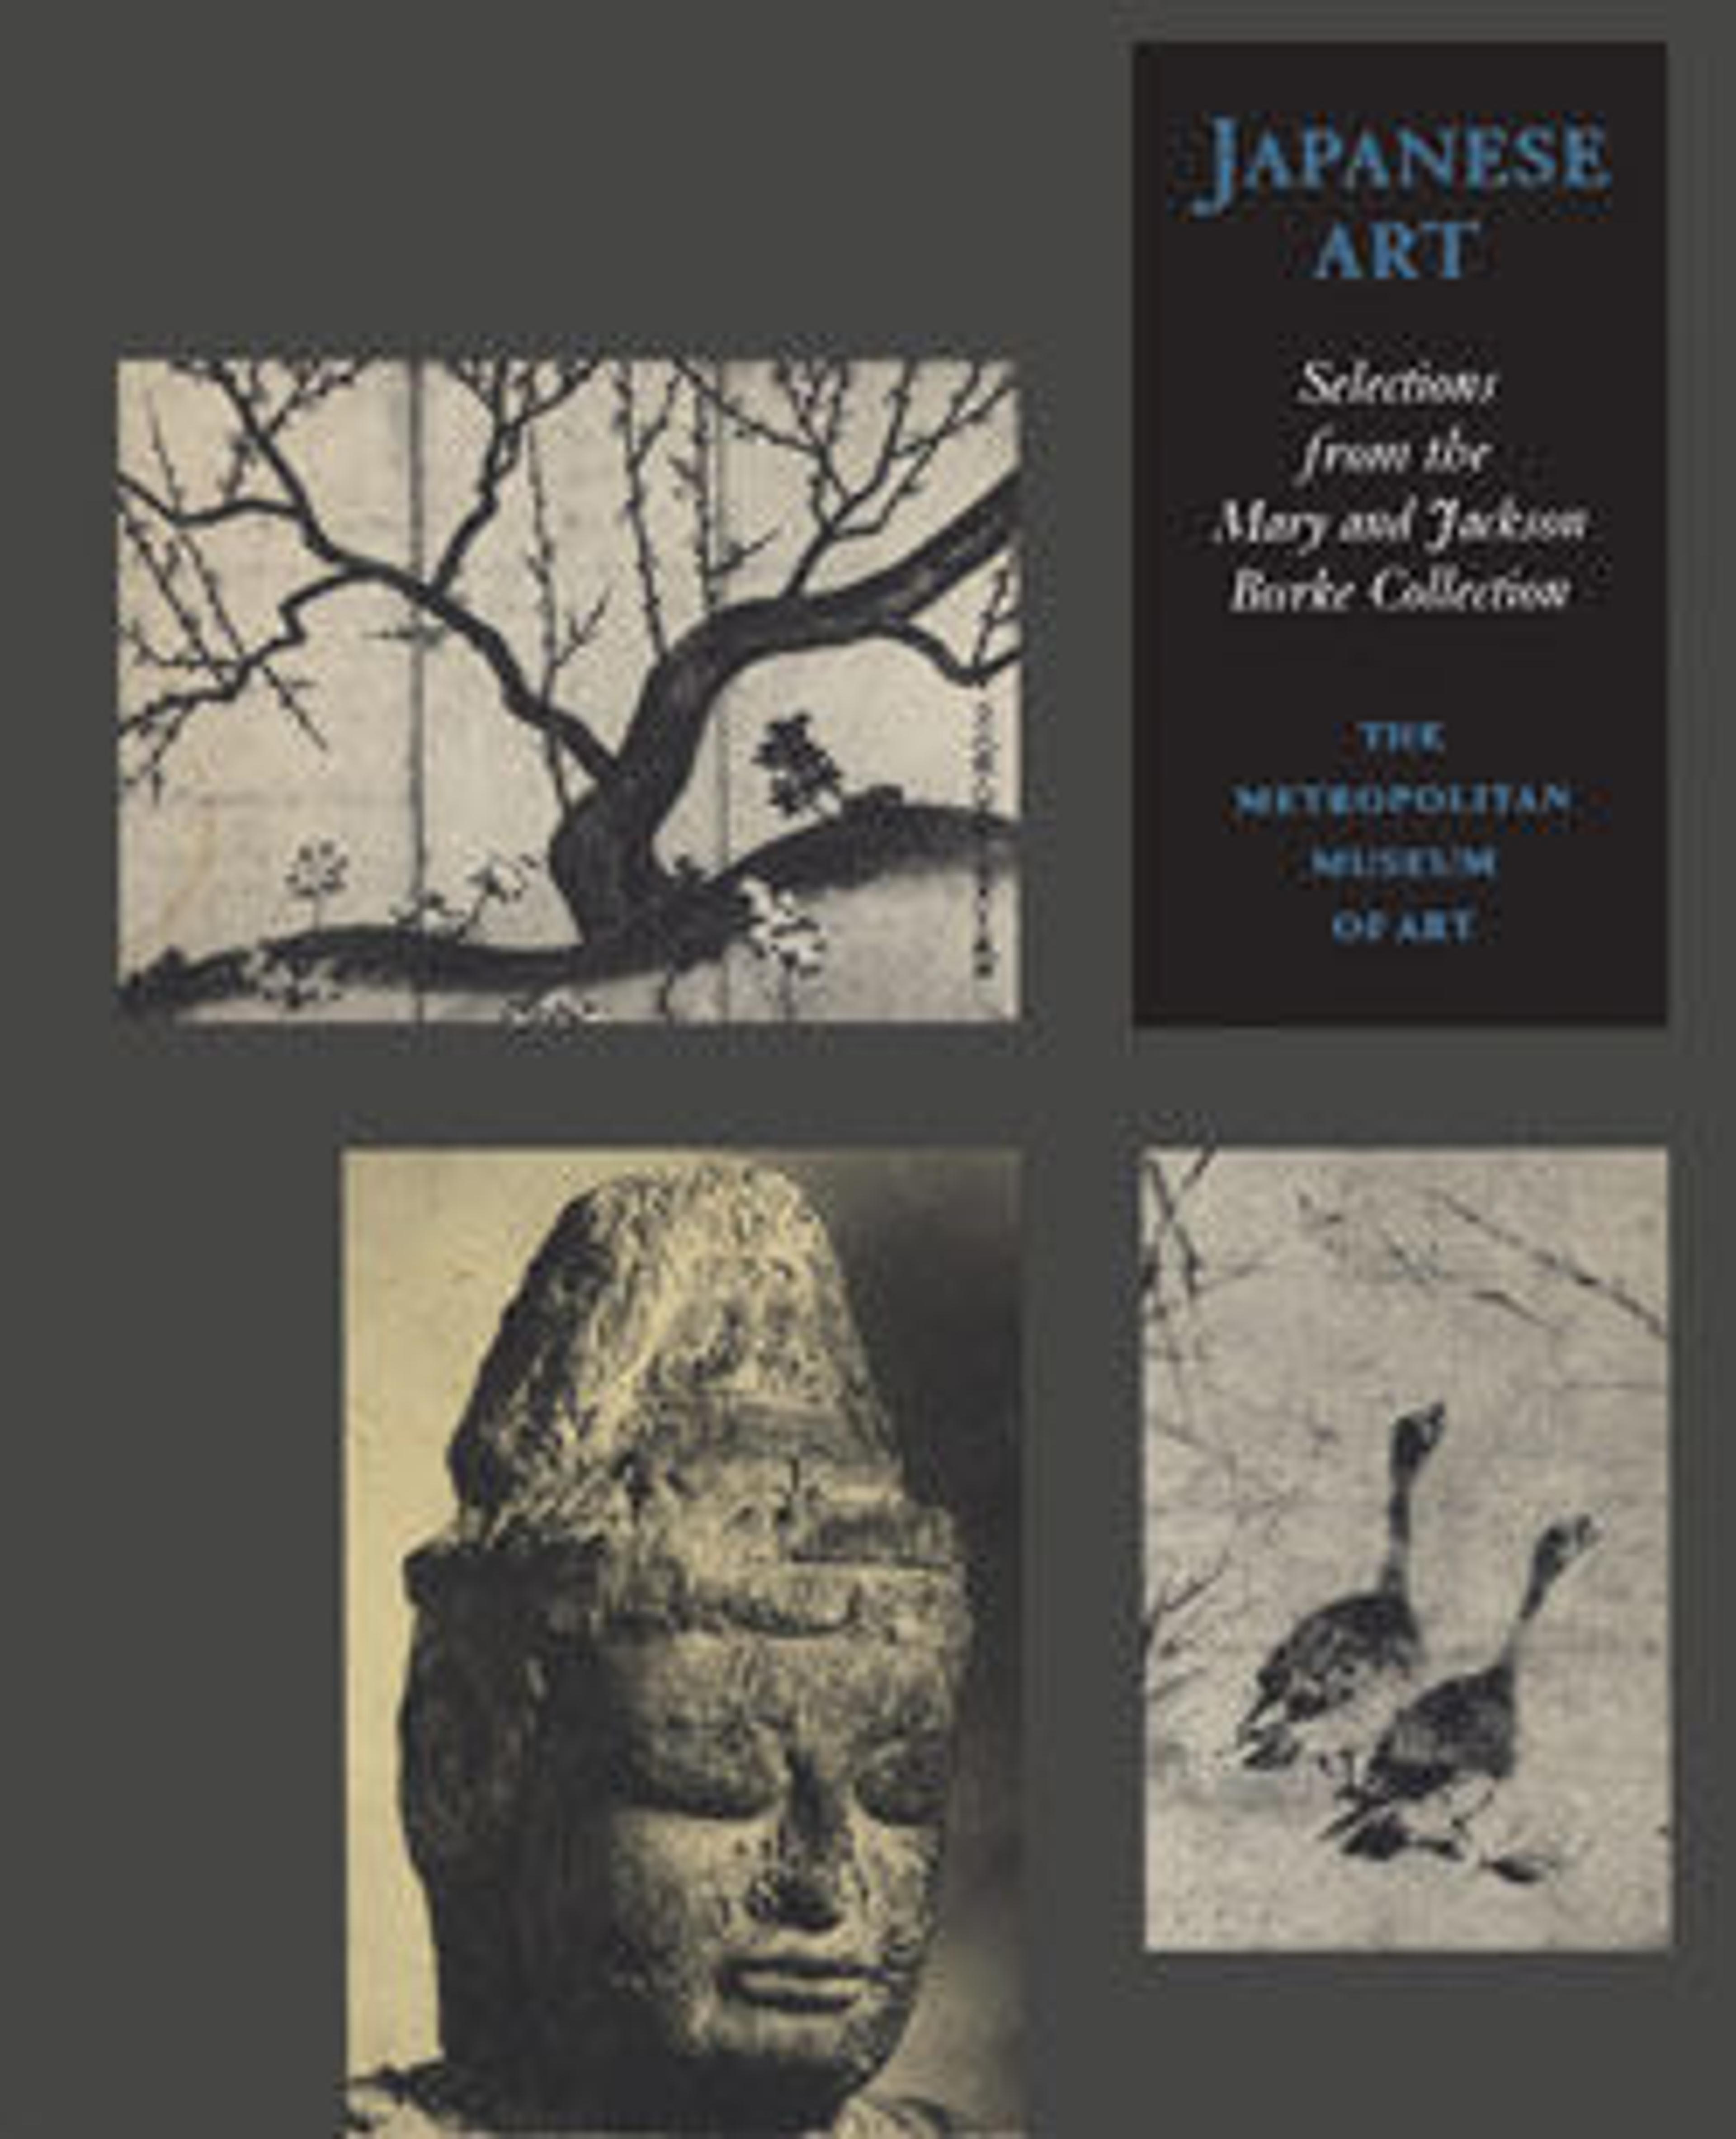 Japanese Art: Selections from the Mary and Jackson Burke Collection